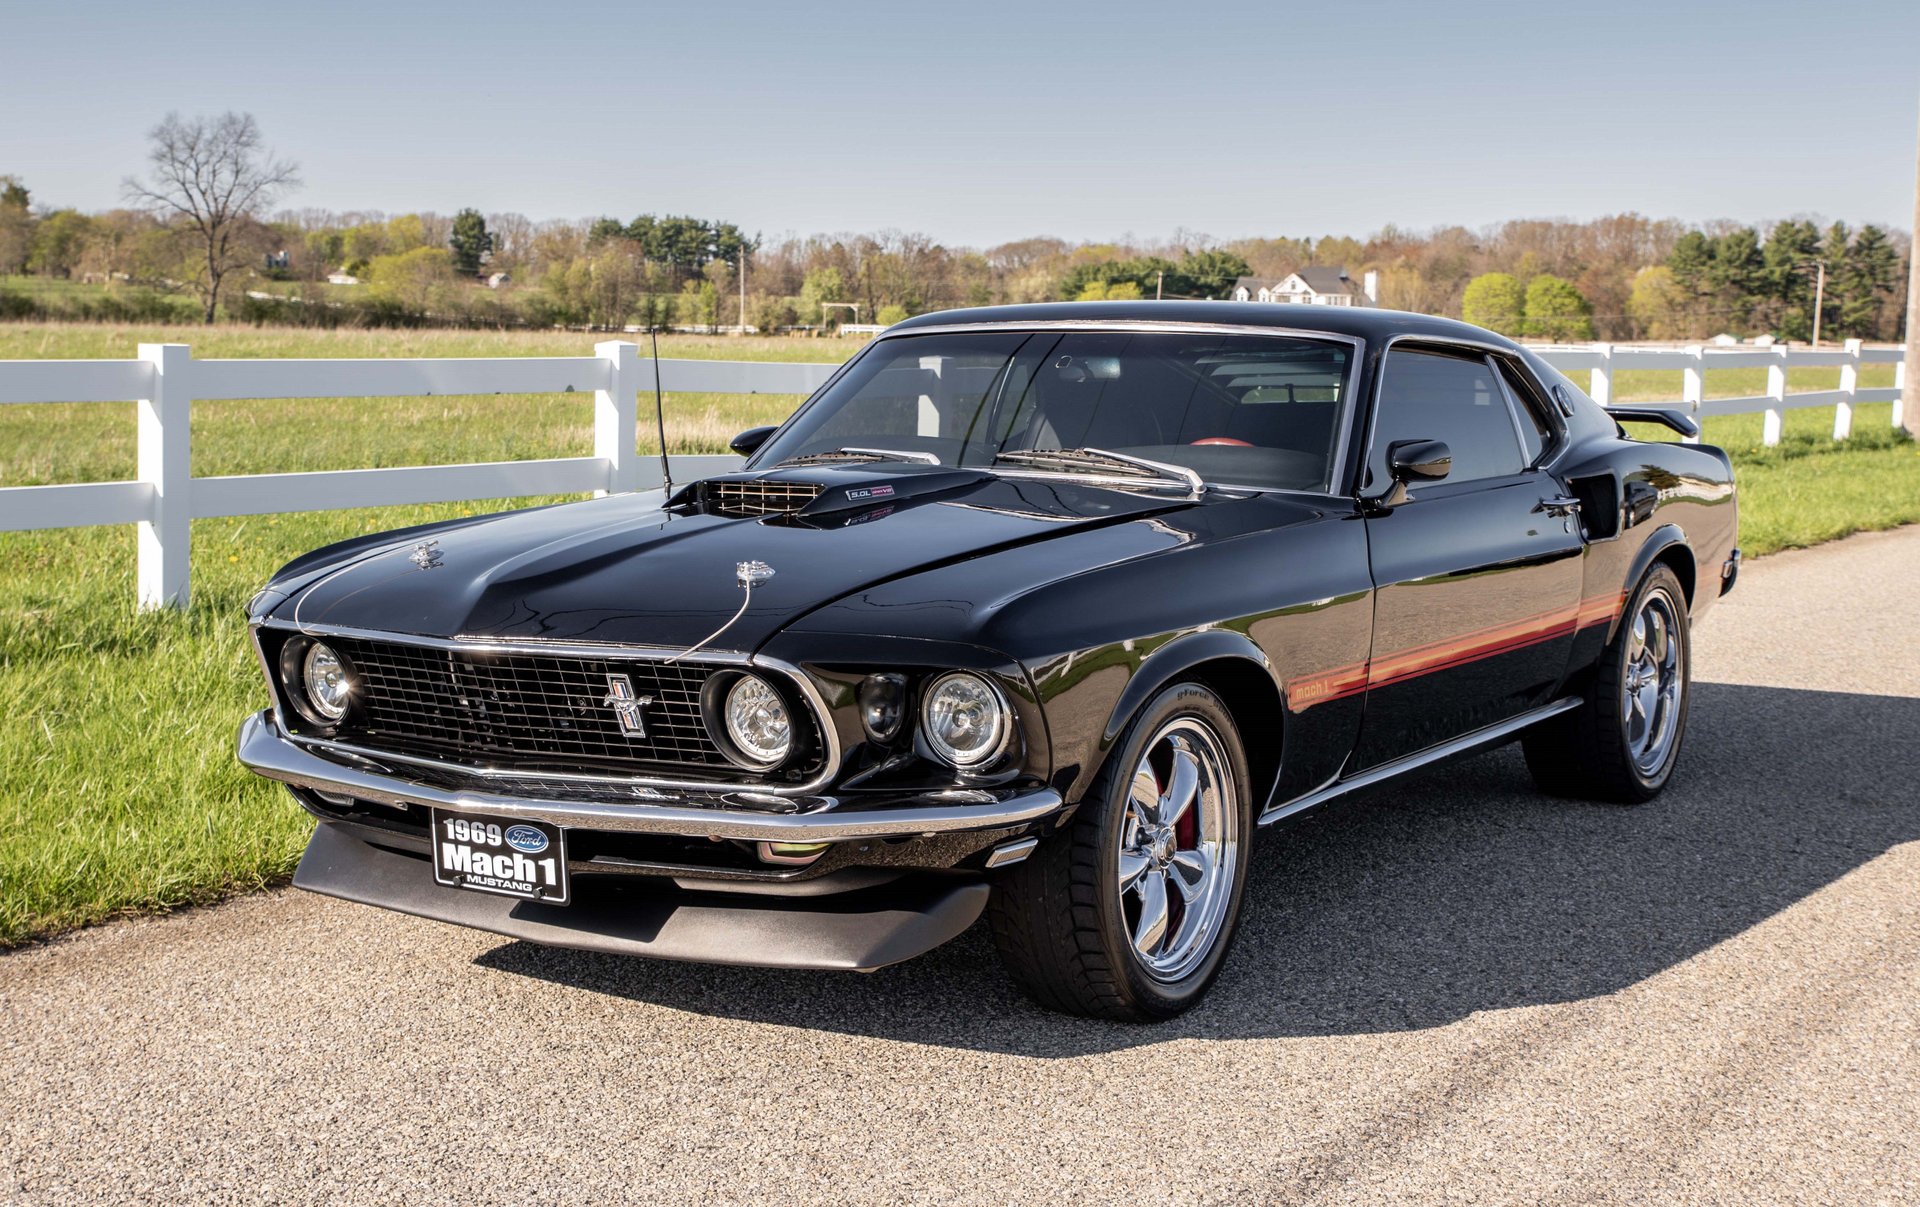 NRC126702 | 1969 Ford Mustang Mach 1 5.0 Coyote Pro-Touring Restomod | No Reserve Classics